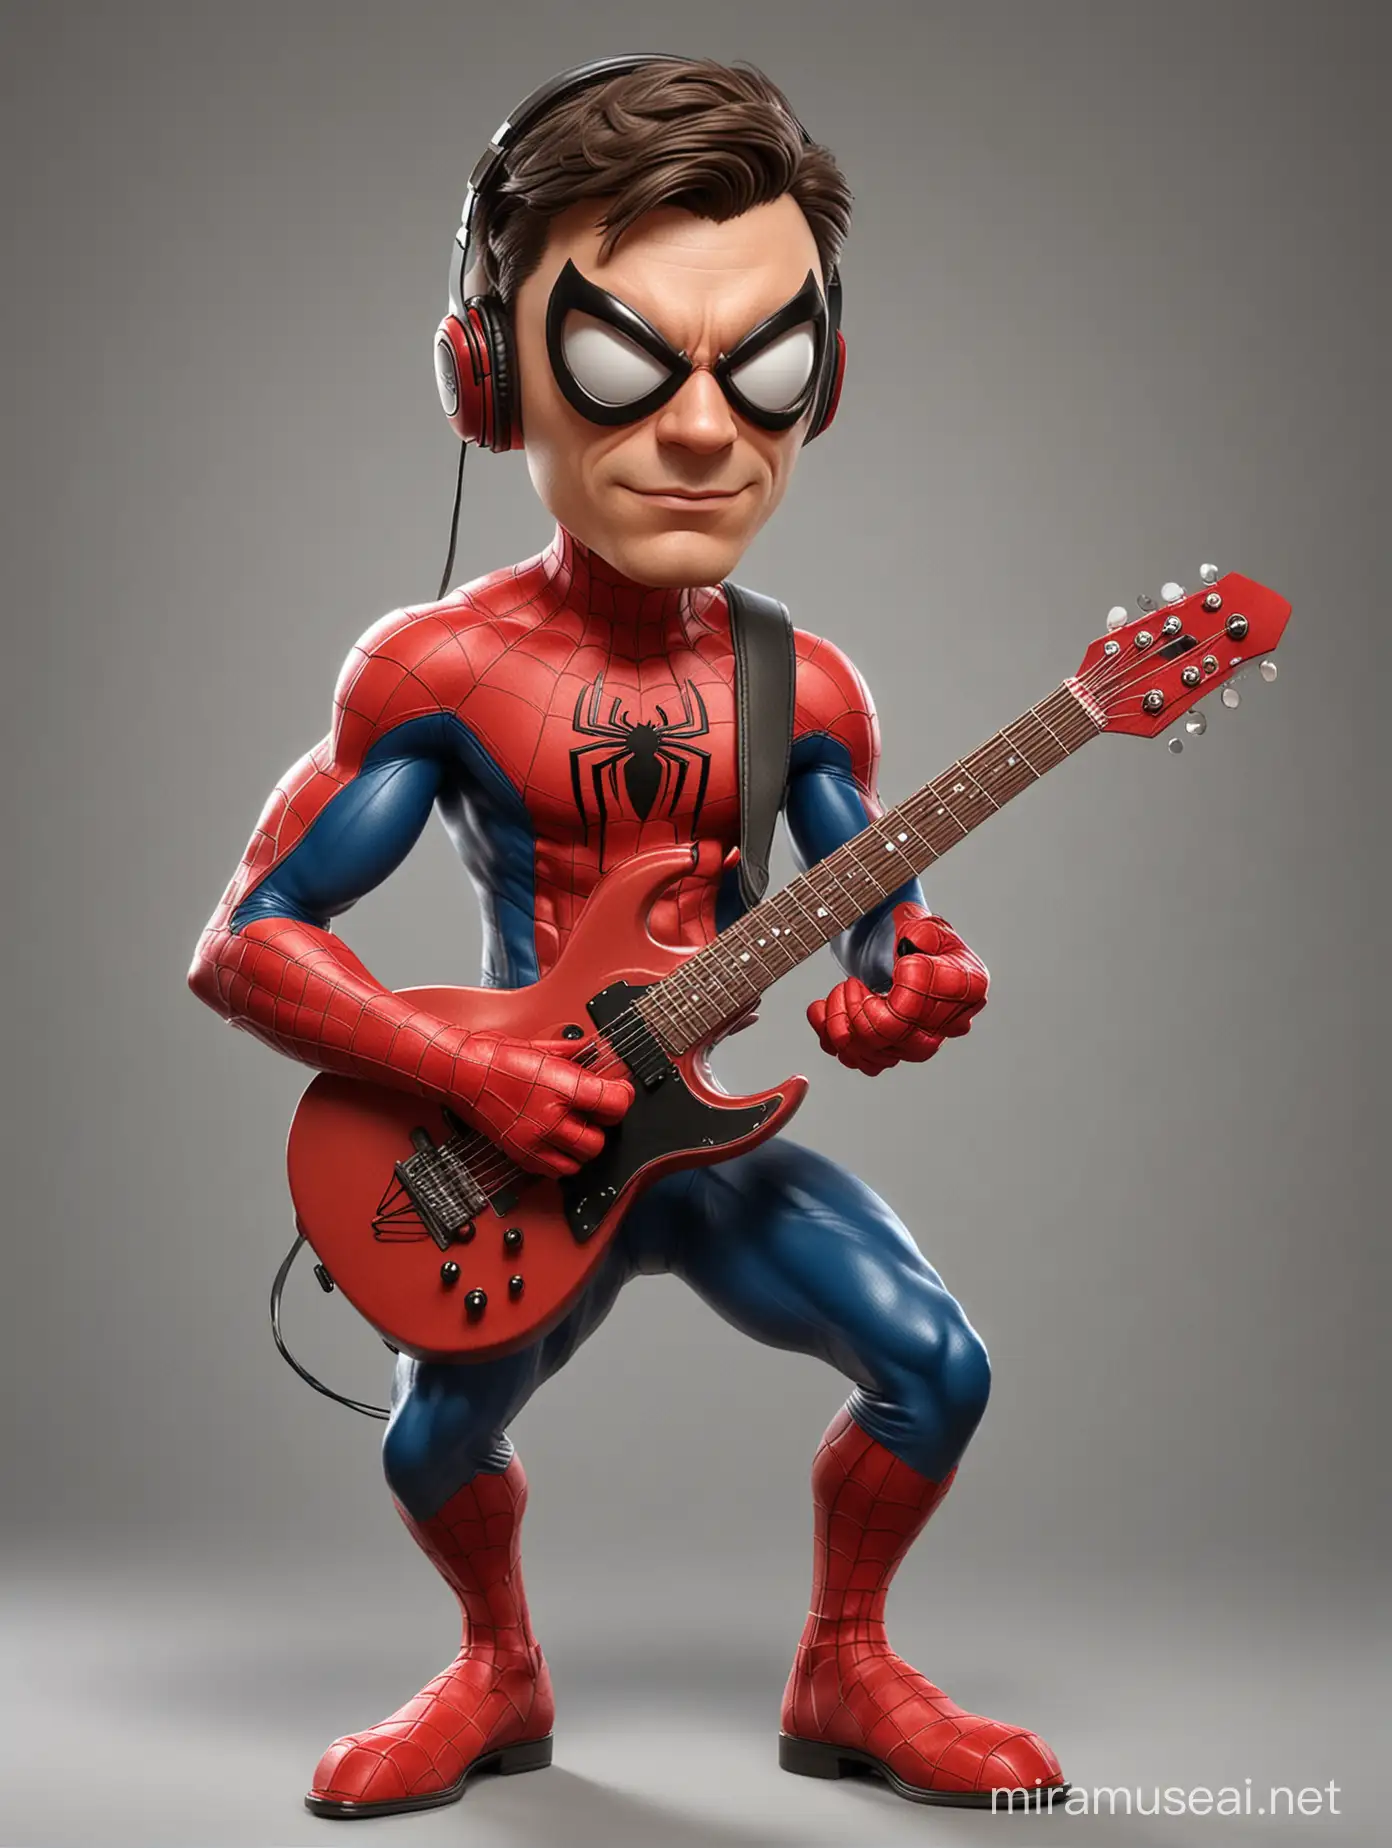 Create a realistic caricature picture of the superhero from Marvel "Spiderman" is seen listening to songs with headphones and playing guitar, by maintaining the character of Spiderman, using costume and spiderman mask look a like as the original, in a caricature style (body caricature , such as body proportions, such as the head or other body parts, often made larger or odder).